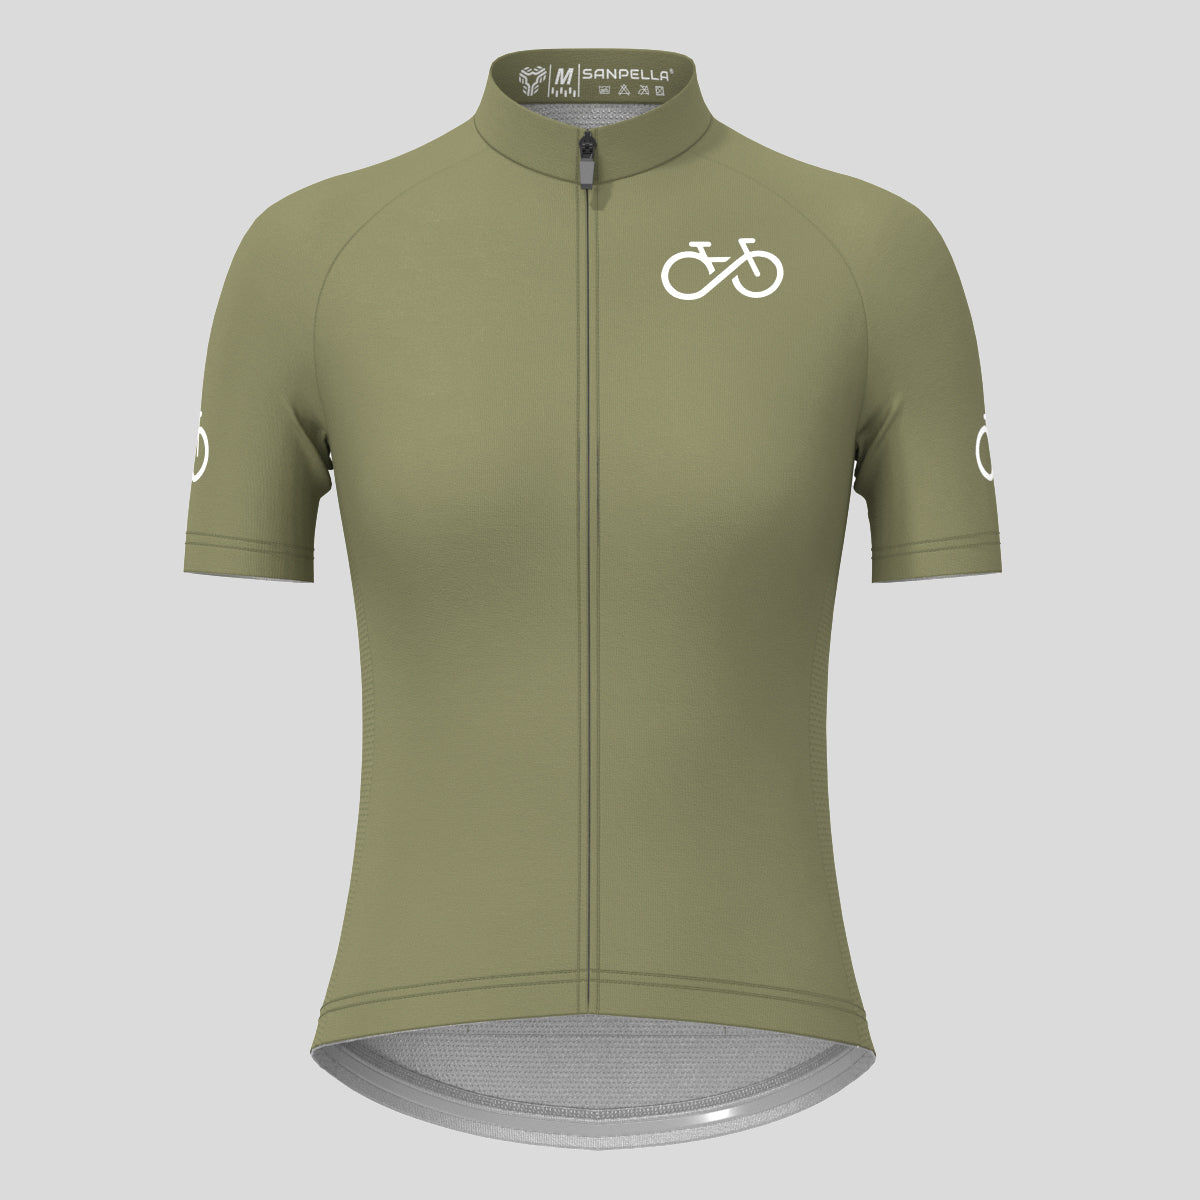 Ride Forever Women's Cycling Jersey - Olive